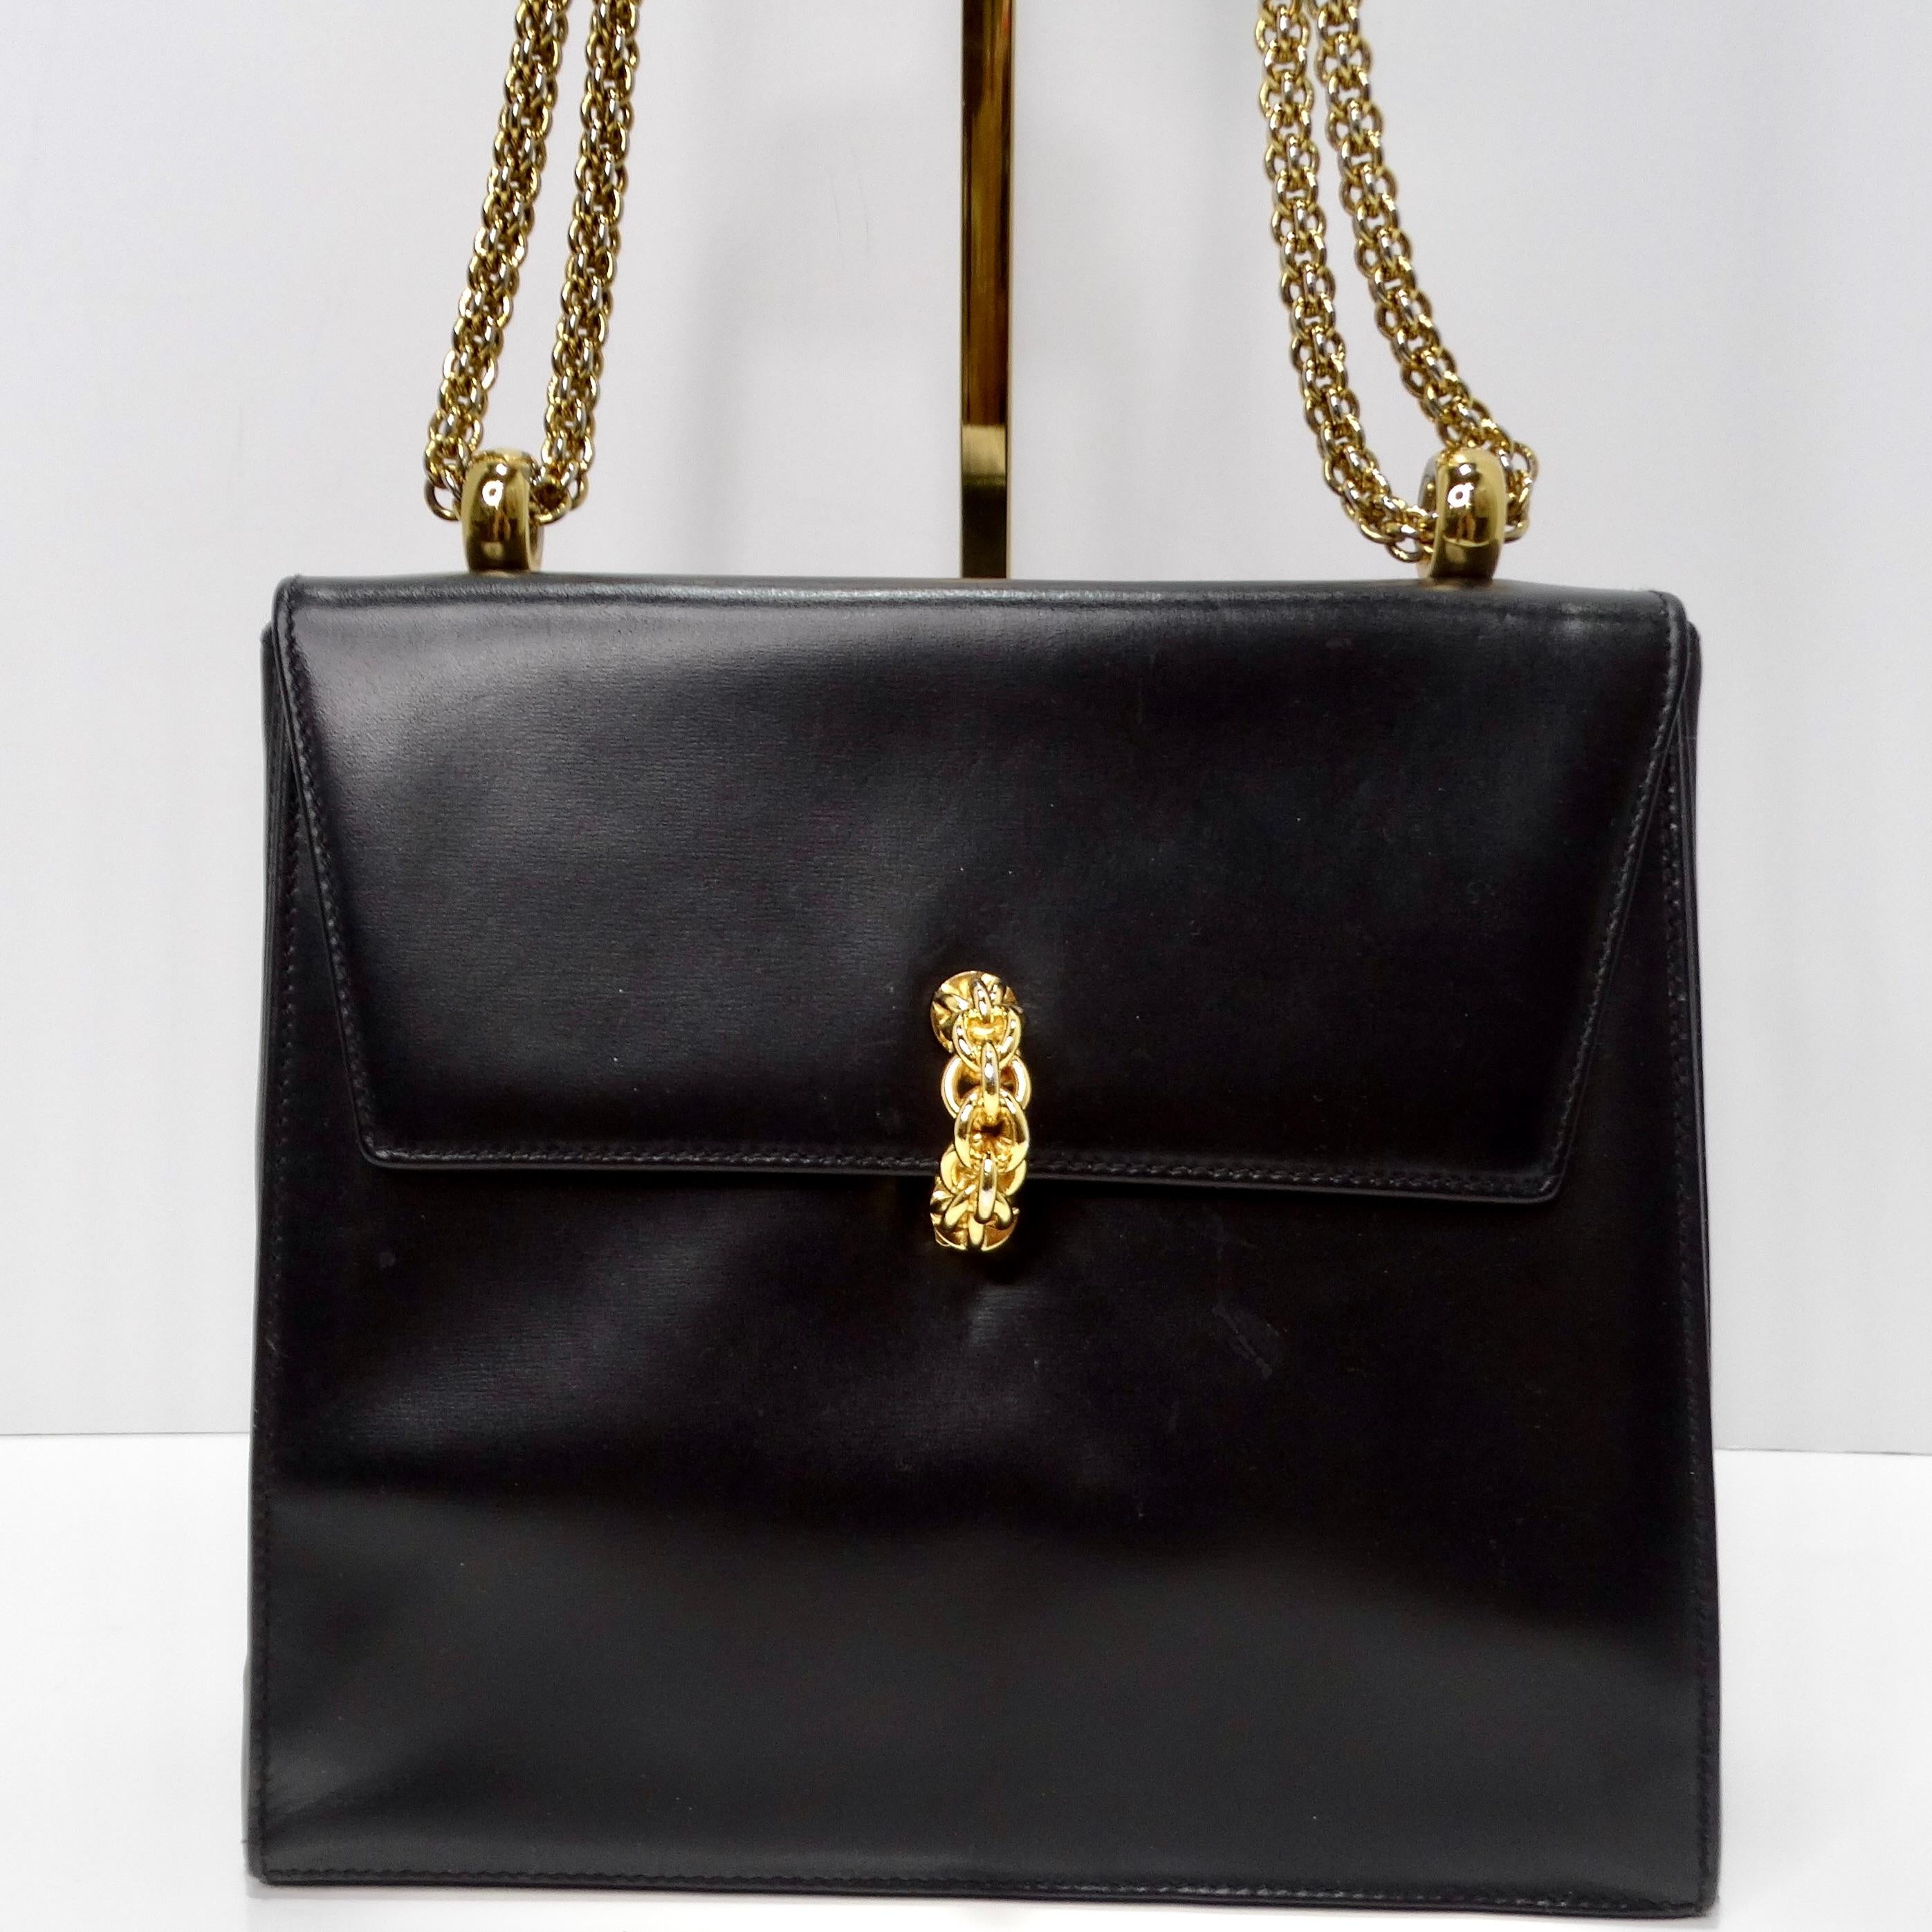 The Paloma Picasso 1980s Black Leather Shoulder Bag is a stylish and sophisticated accessory that adds a touch of elegance to any ensemble. Crafted from black leather, this structured handbag features a timeless design with a modern twist.

The